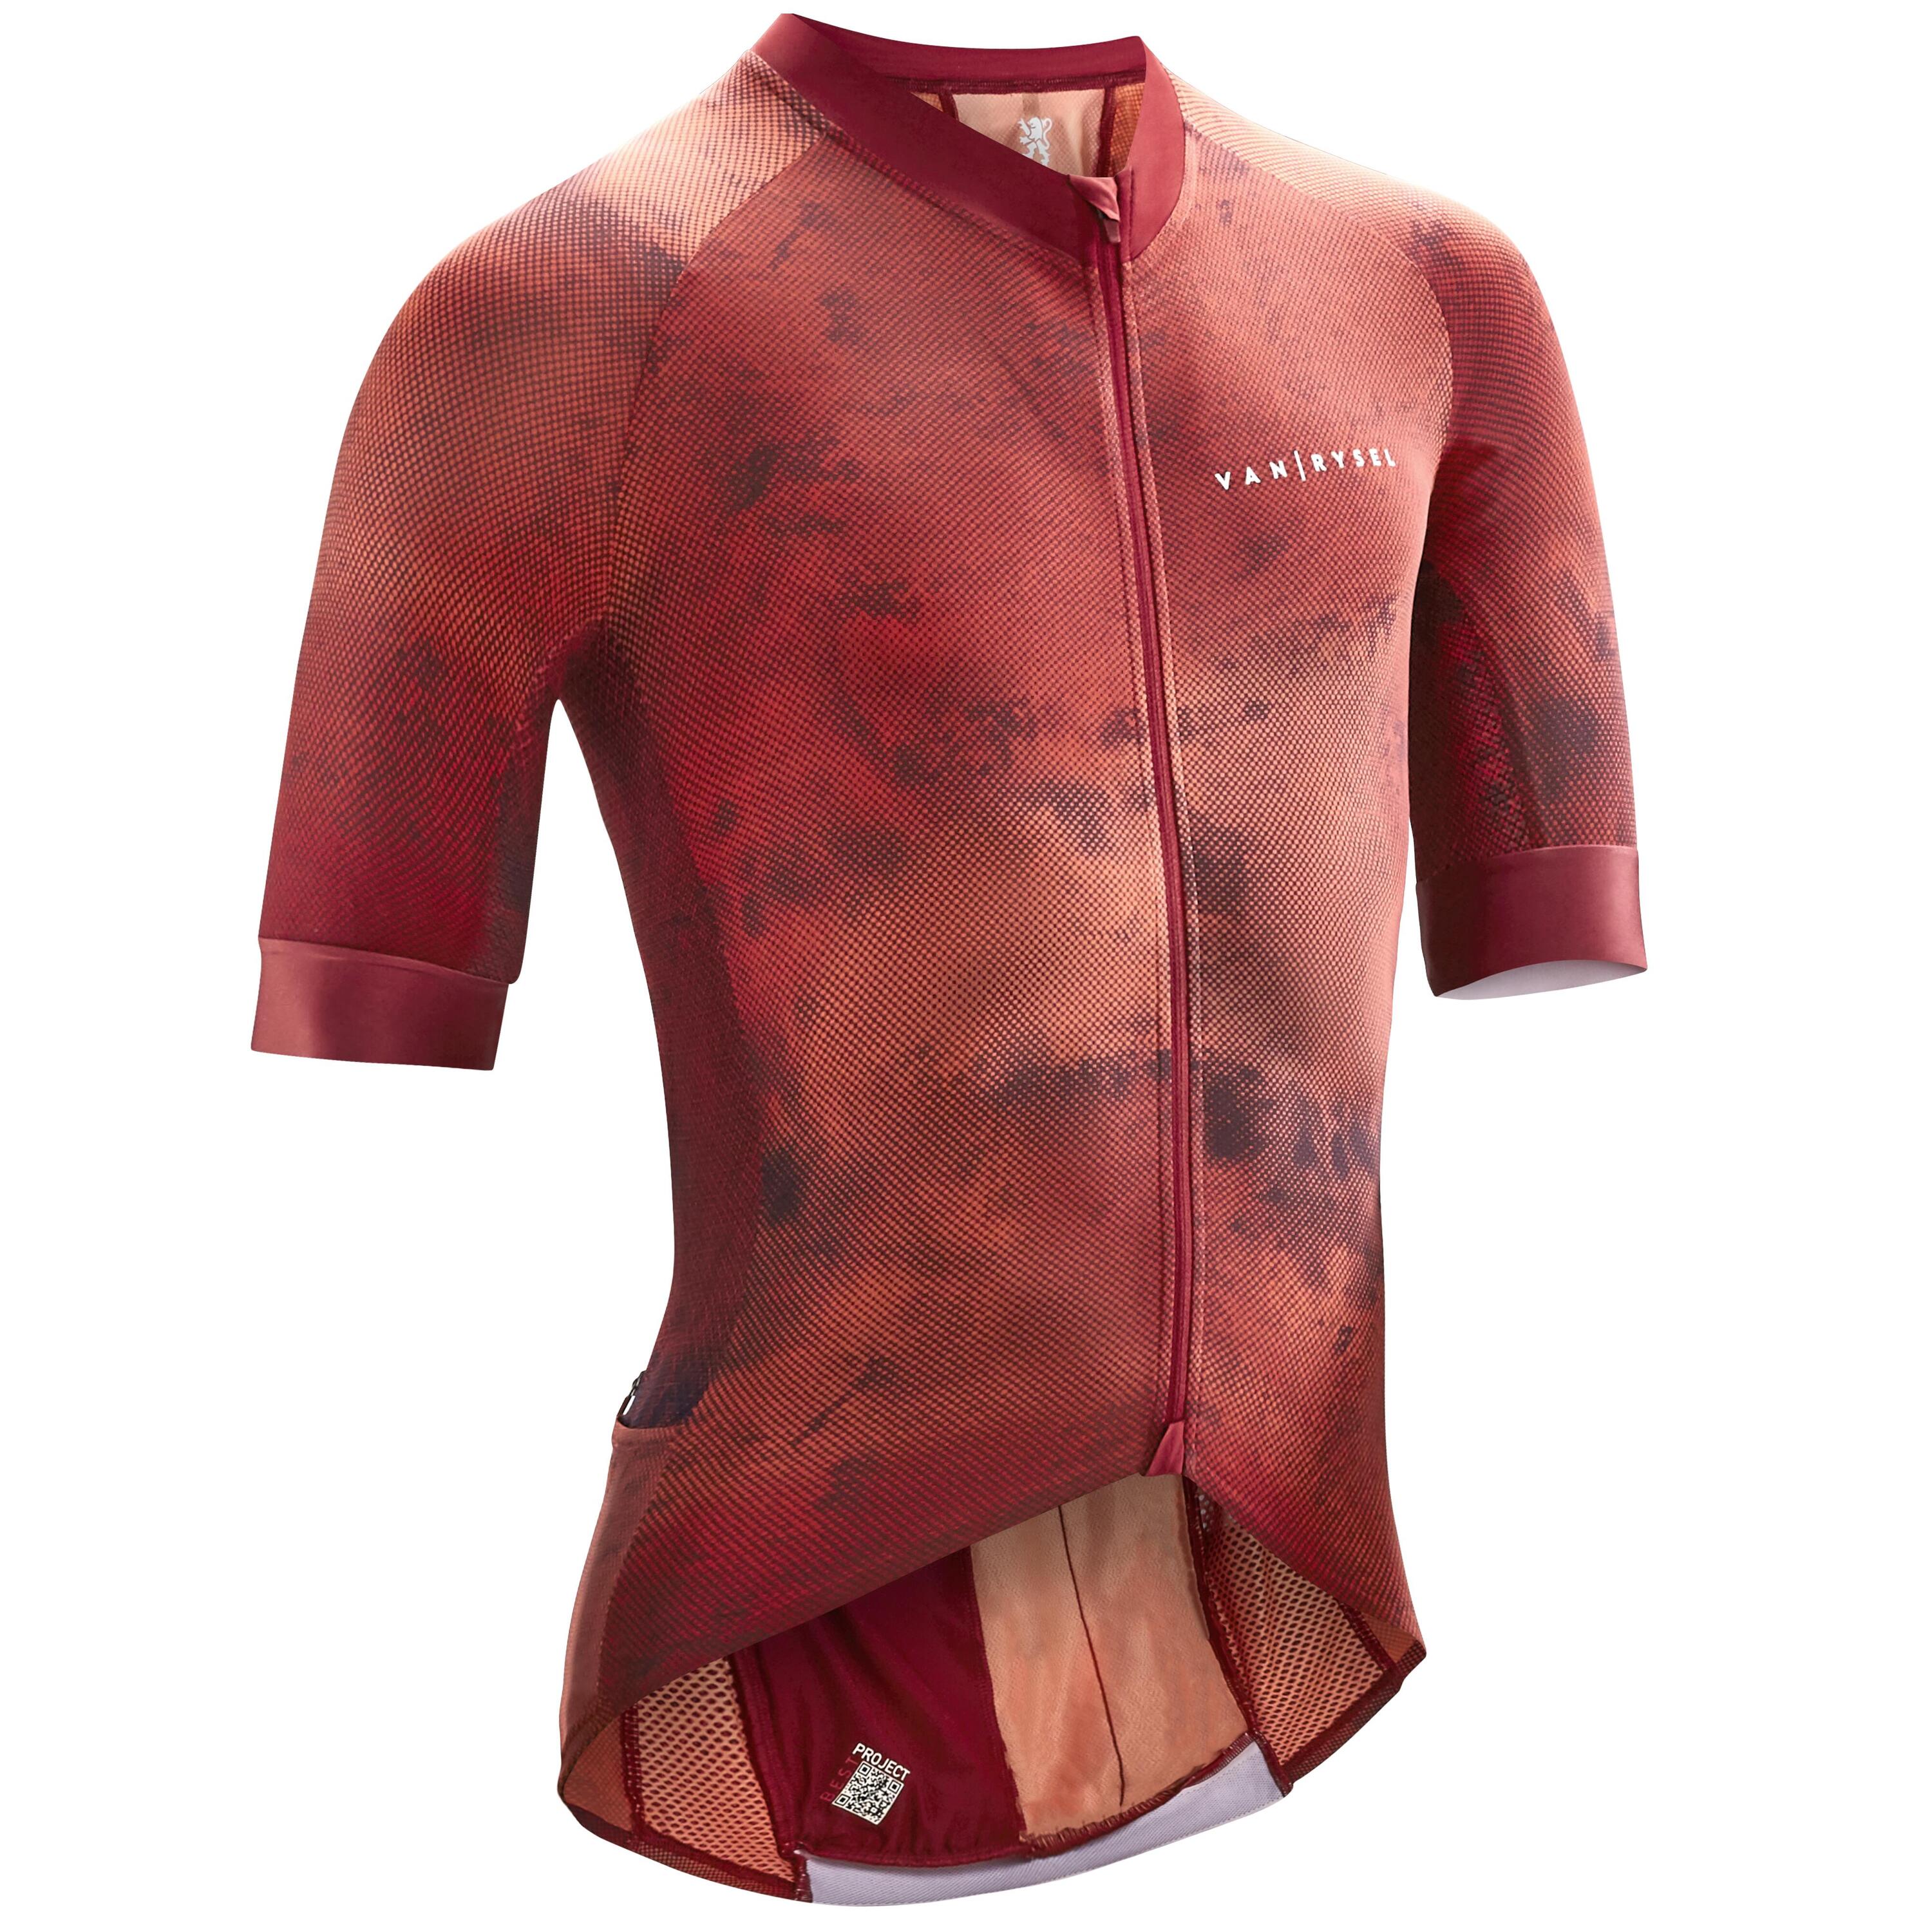 VAN RYSEL Men's Short-Sleeved Road Cycling Summer Jersey Endurance Racer - Changing Red